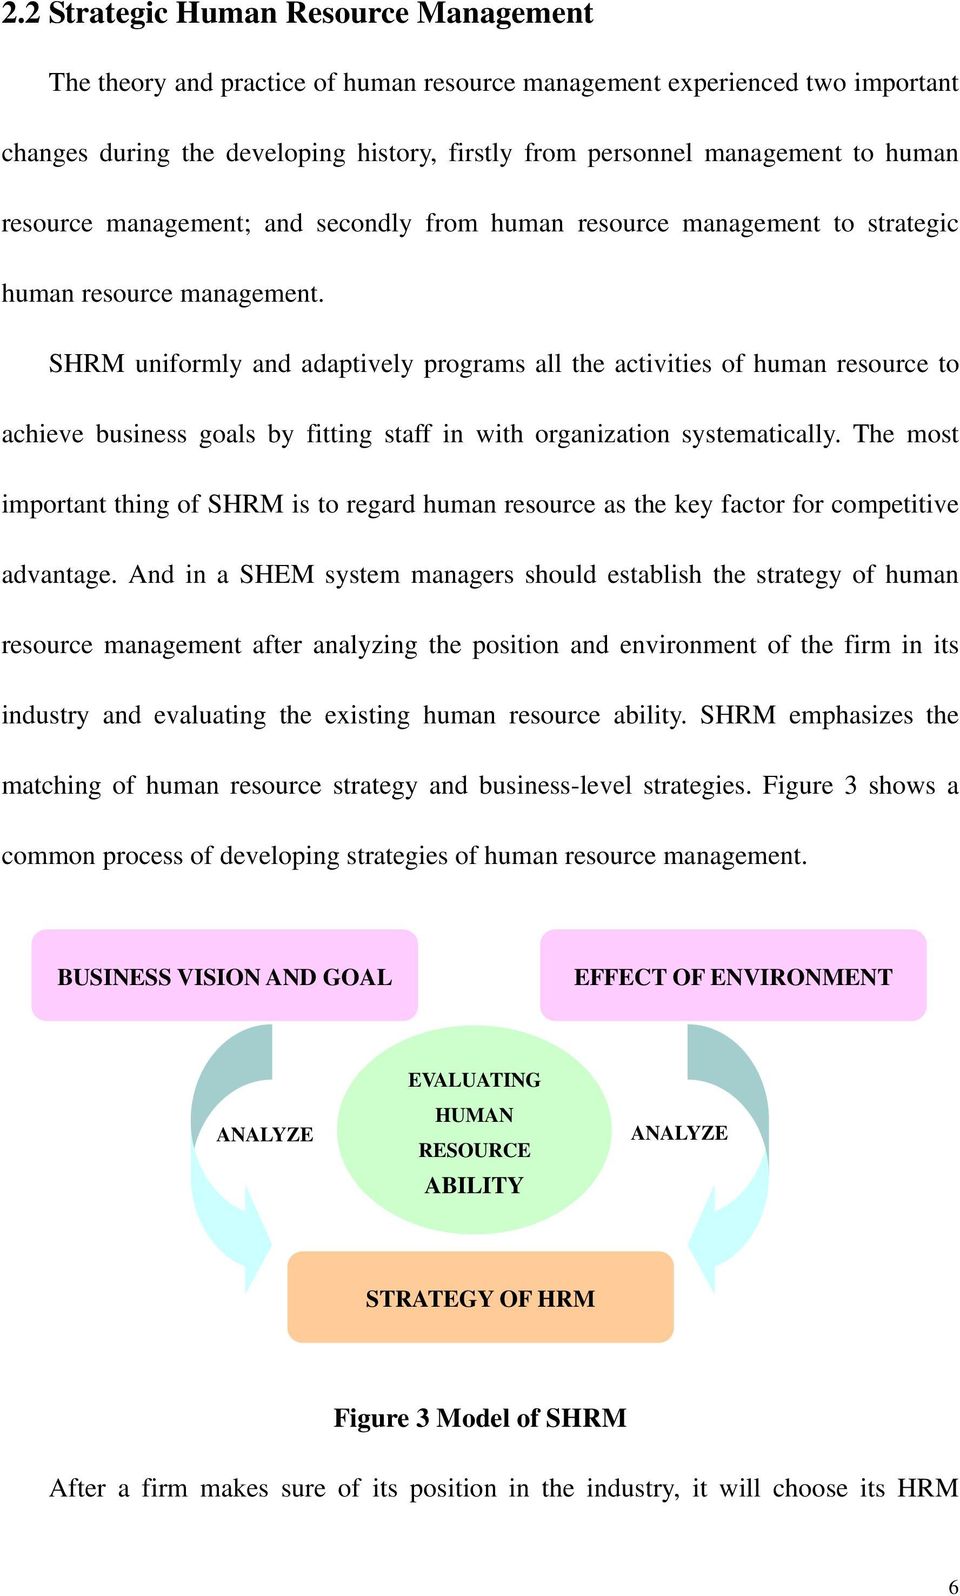 SHRM uniformly and adaptively programs all the activities of human resource to achieve business goals by fitting staff in with organization systematically.